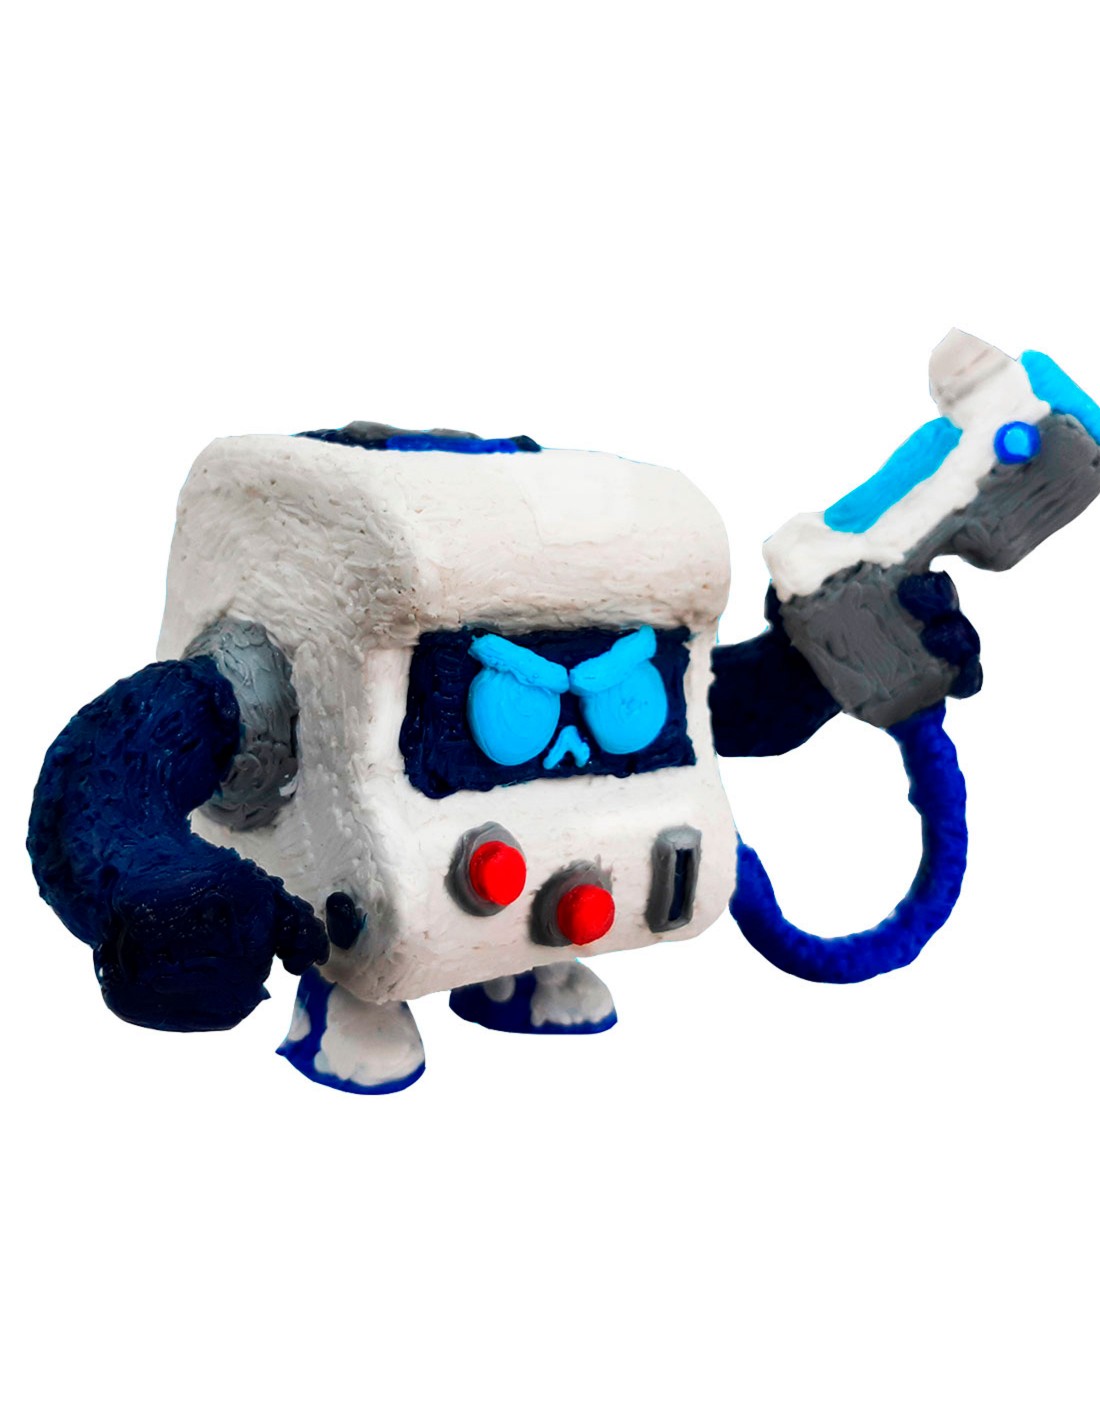 8 Bit From Brawl Stars Free Template For A 3d Pen